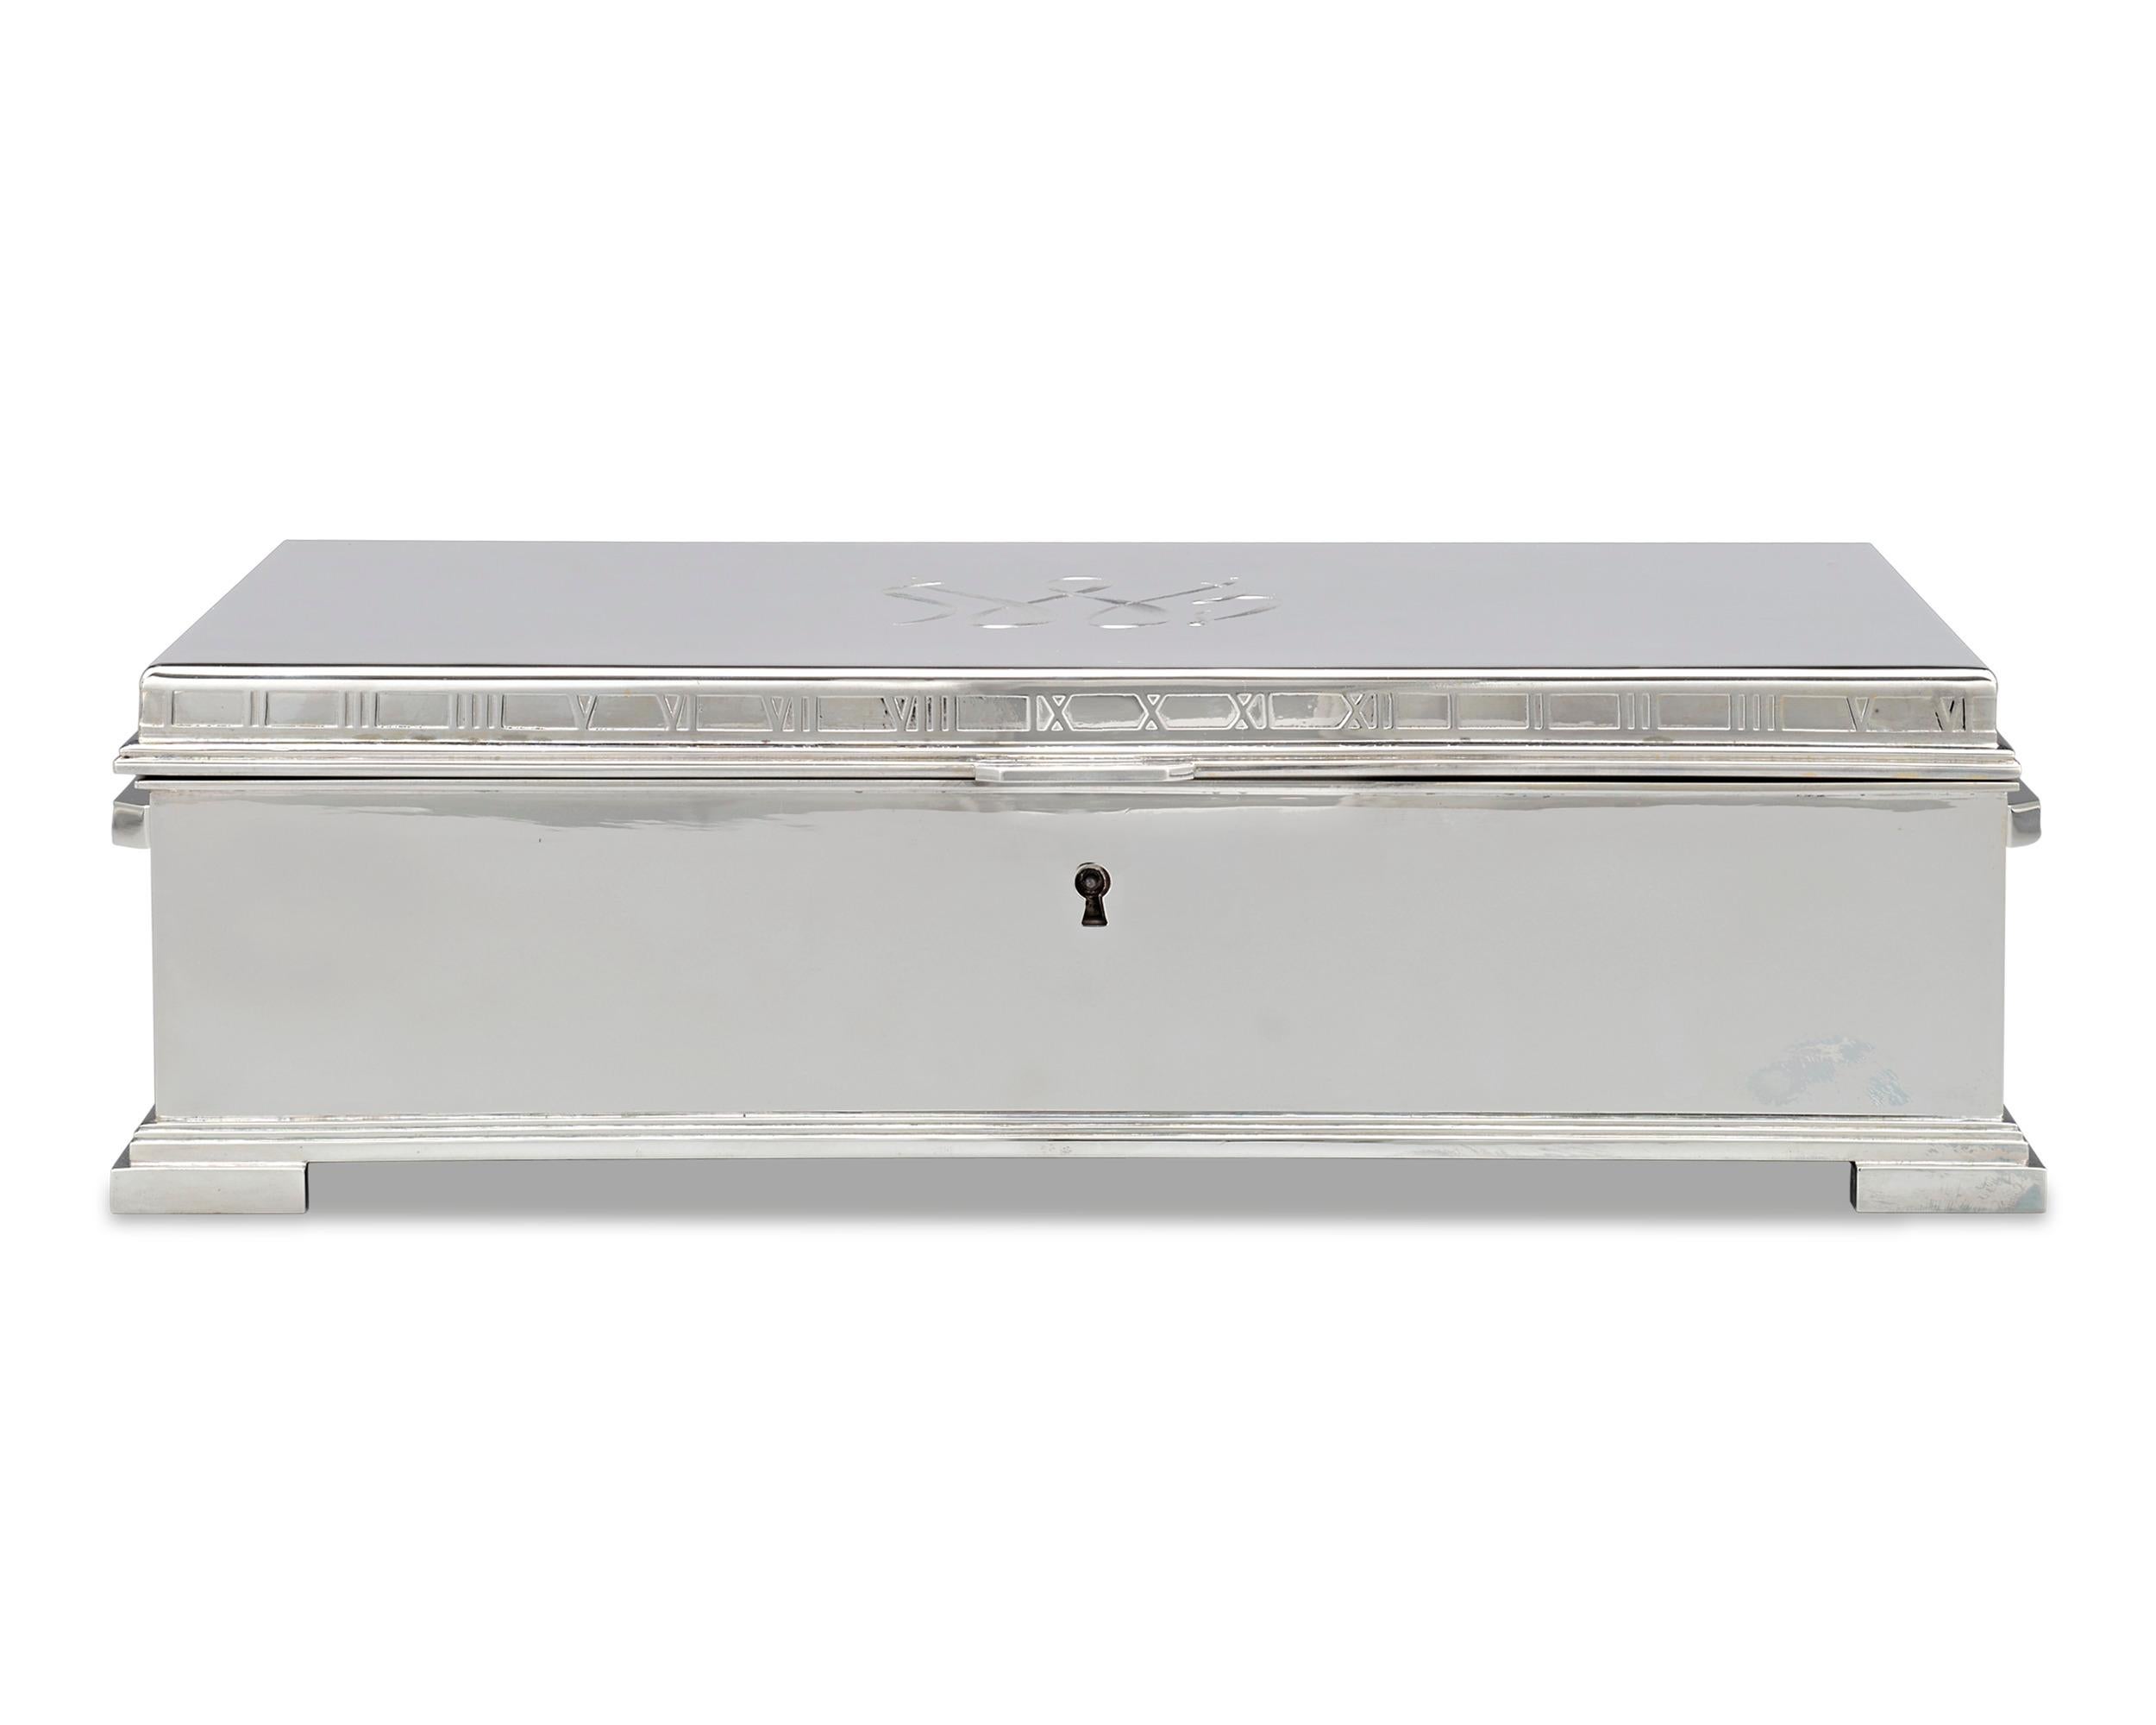 Tiffany & Co. silver is renowned for its intrinsic sophistication and superior quality, and this sterling silver document box is no exception. Its straightforward design is adorned with a Roman numeral motif along the rim and supported by bracket